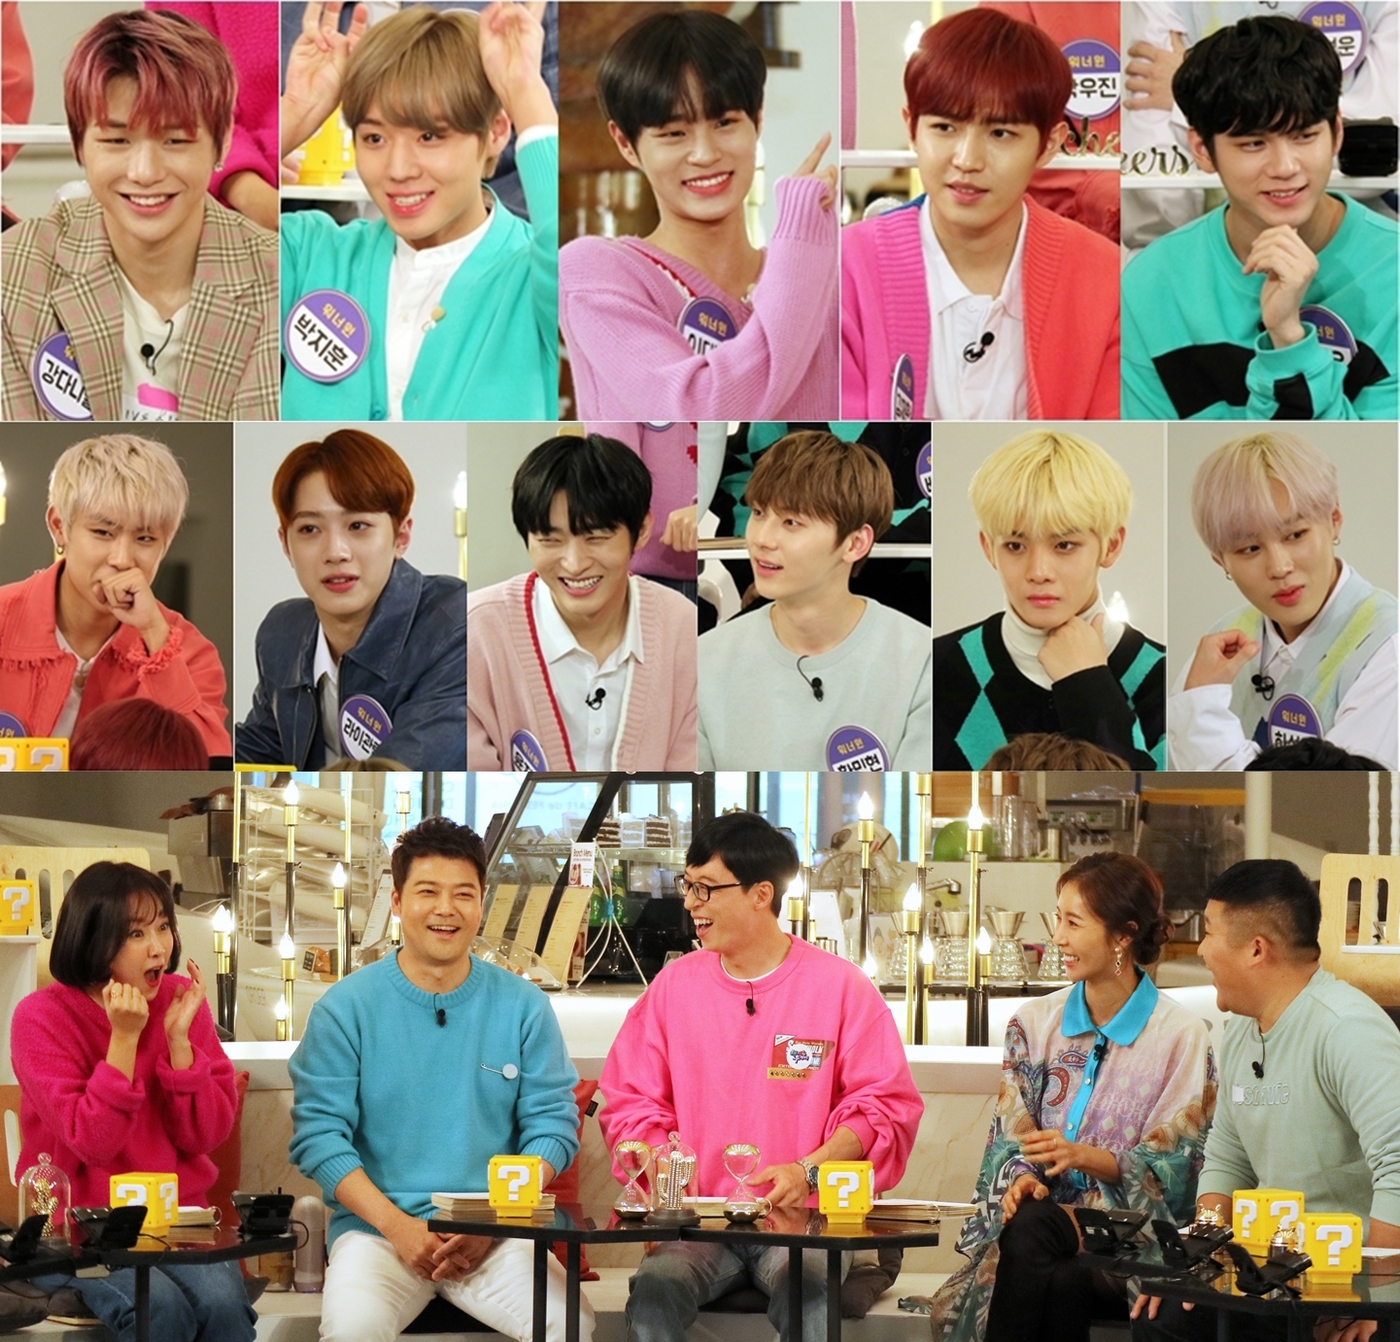 KBS 2TV Happy Together 4 (hereinafter referred to as Hatu 4) will be broadcast on the 15th as a Wanna One Special feature, which will be launched by Wanna One complete.On the day of the show, Special MC Han Eun-jung and Kim Ji-hye, as well as the Idol Idol Wanna One, who believes in it, will appear and throw a laughing nuclear bomb at the house theater on Thursday night.In a recent recording, Kang Daniel confessed to the desire for entertainment, which he had hidden, saying, I am greedy for broadcasting these days.He then met with friends for the Episode, saying, I kept calling the artist every time the Episode came up. He showed off the aspect of the Episode obsession and foresaw the unusual recording from the beginning.In addition, Rygwanrin, who had been constantly taking out the Episode, said, If Yoo Jae-seok wants to talk about five more Episodes, he said.Yoon Ji-sung, who was also interested in the movie, said, I was in Busan the day Hwang Min-hyun played the Special MC for Hatu 4. Yoon Ji-sung said, Warner One is busy, but I am not busy.I want you to call me anytime. He also laughed at the Special MC spot.Wanna One, who made headlines with the appearance of the complete Hattoo on the day, is the back door that showed off the aspect of the talk box end king who shakes off all the circulation.Also, it is said that the laughter has not ceased due to the artistic sense of those who have confided in their souls, such as a godly dance showdown that predicts uninterrupted talk and rare work, raising expectations vertically for the Wanna One Special.Happy Together 4 will be broadcast at 11:10 pm on the 15th.